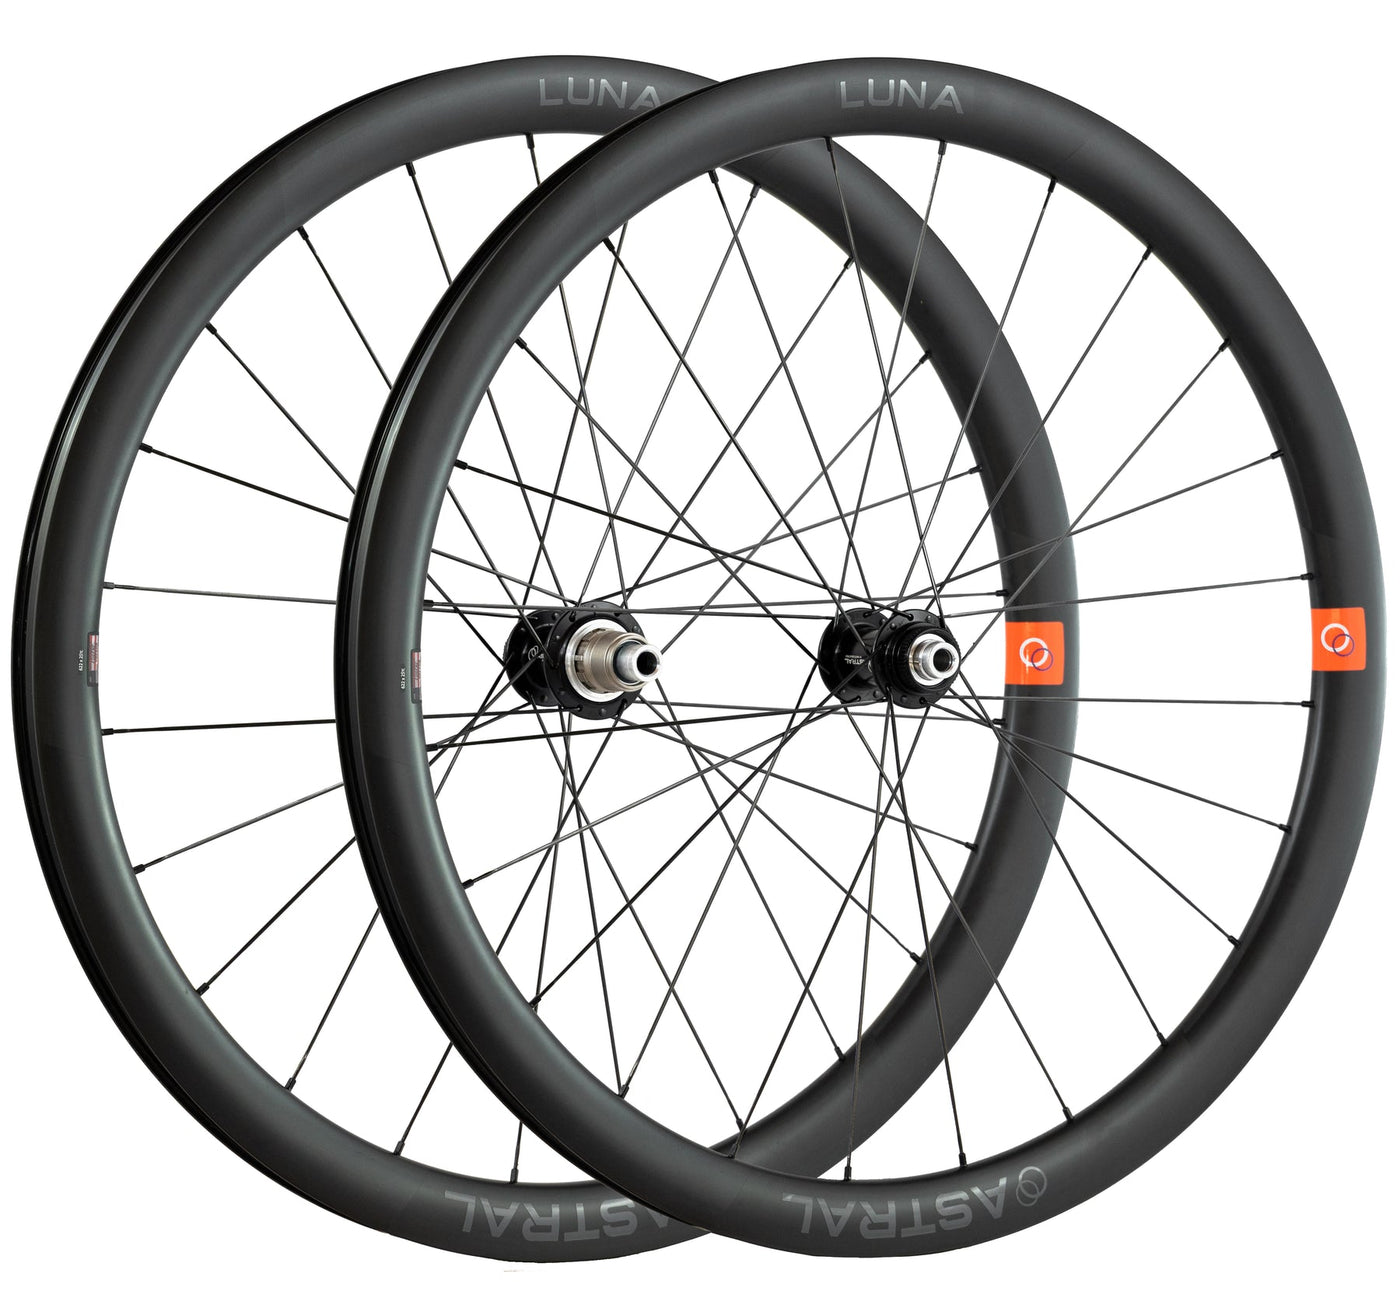 Astral Luna Carbon Disc Rims to Astral Approach CL Hubs